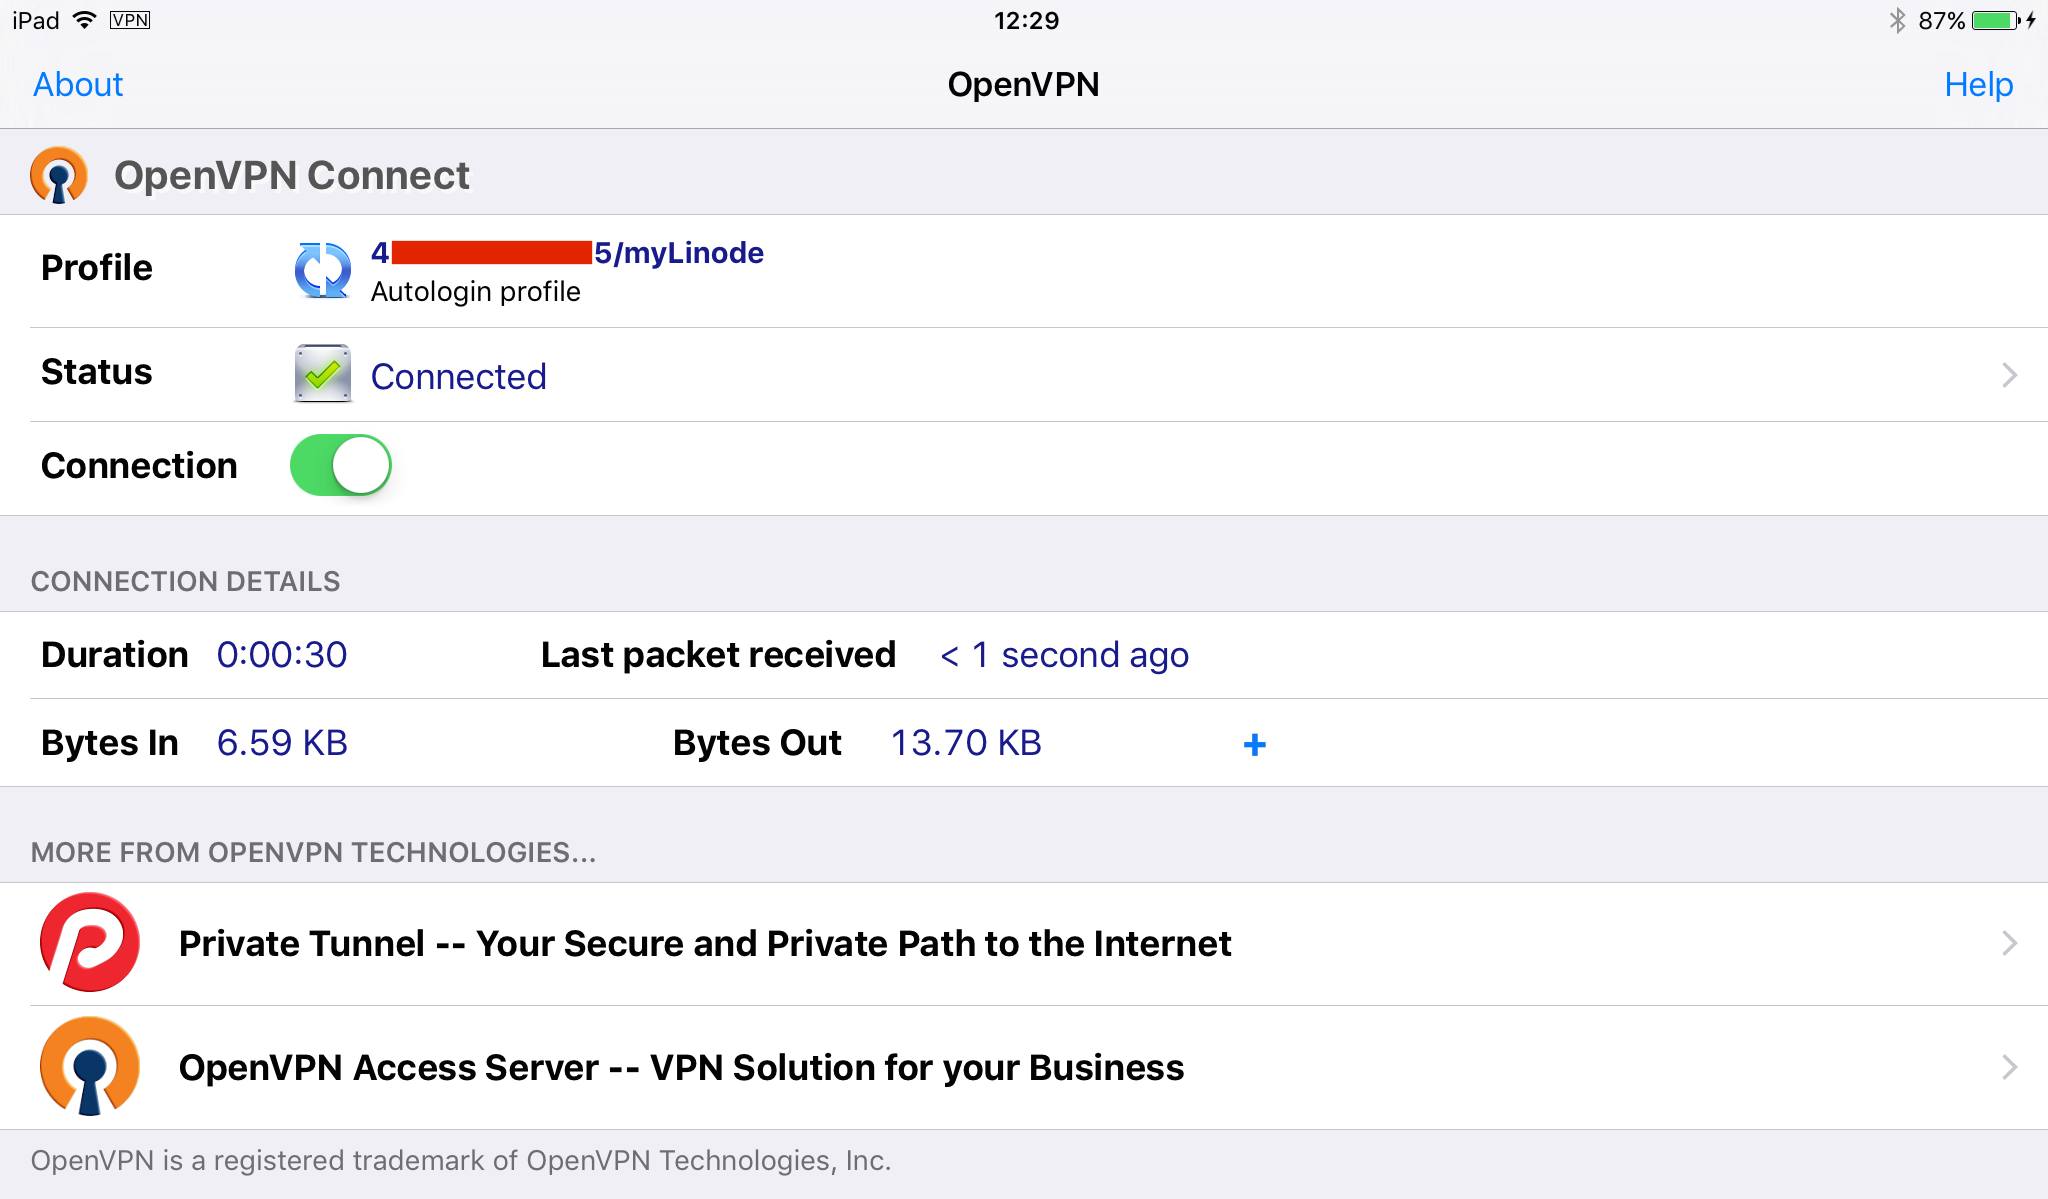 OpenVPN Connect, connected.